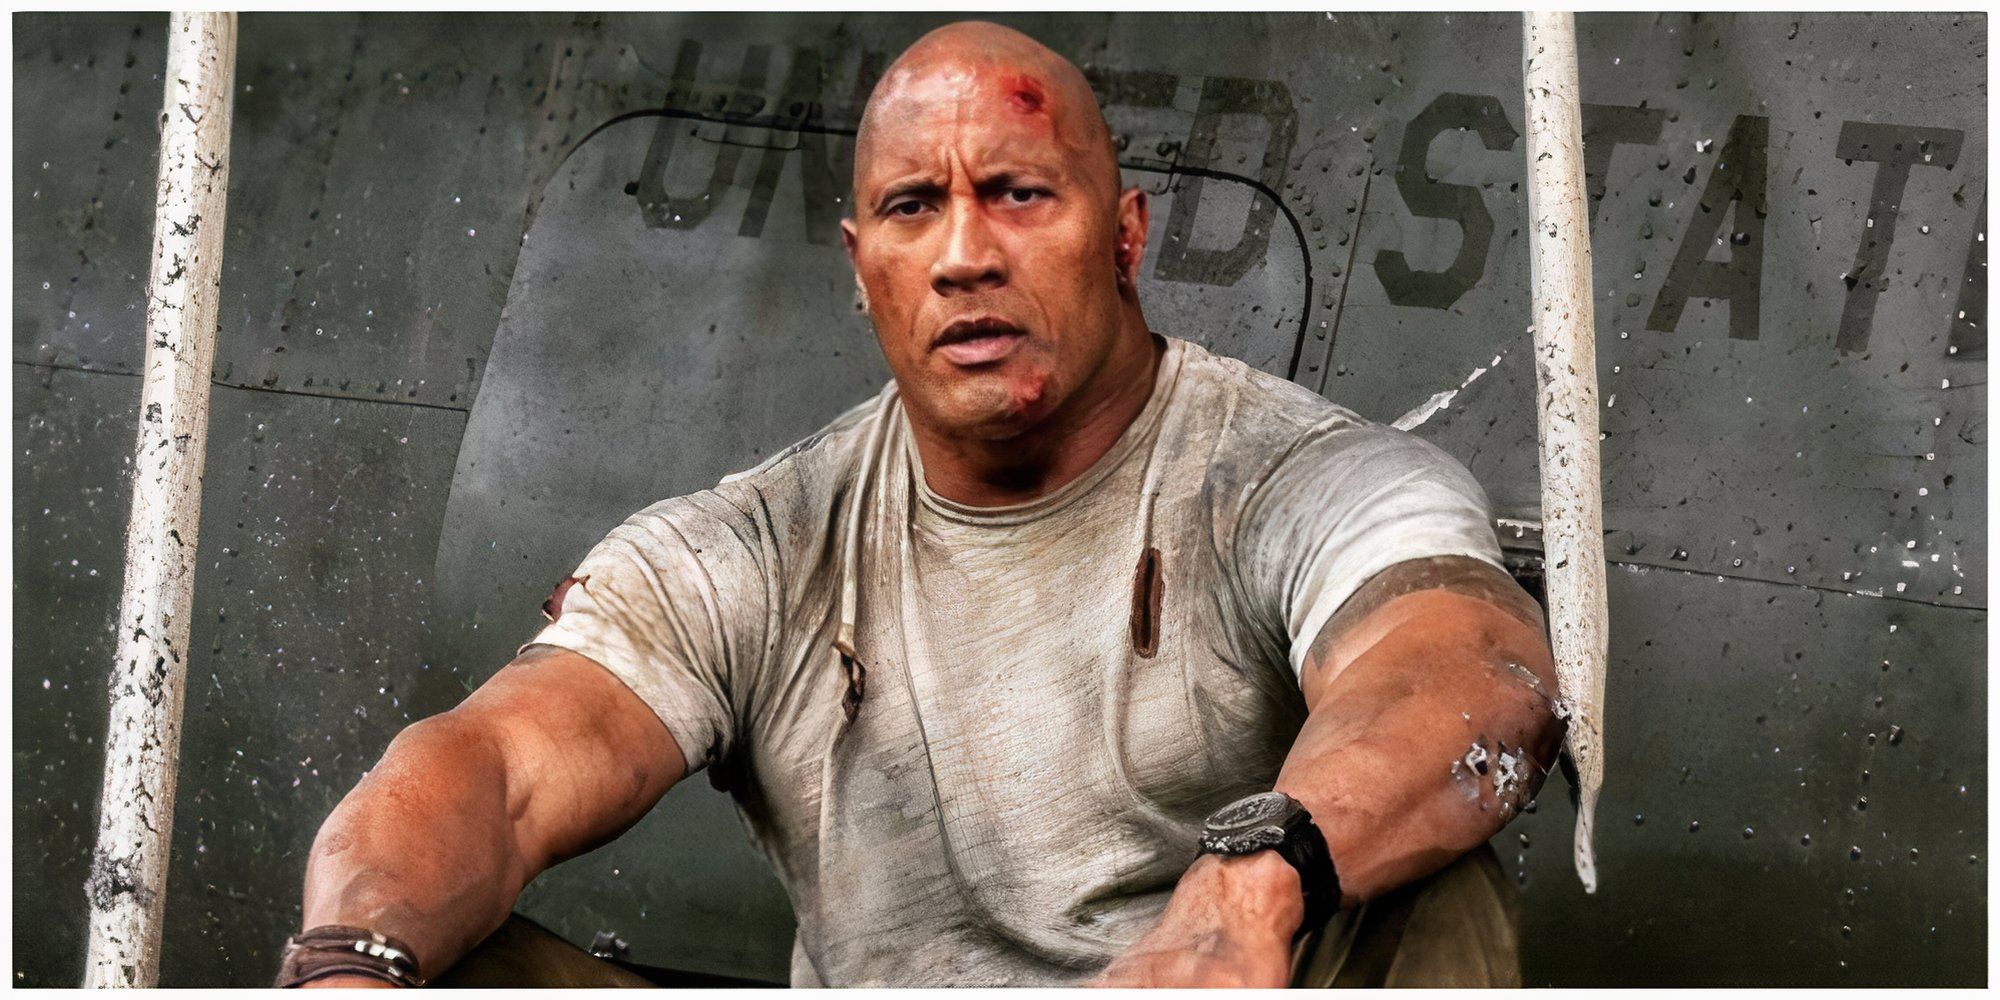 The Rock Rampage